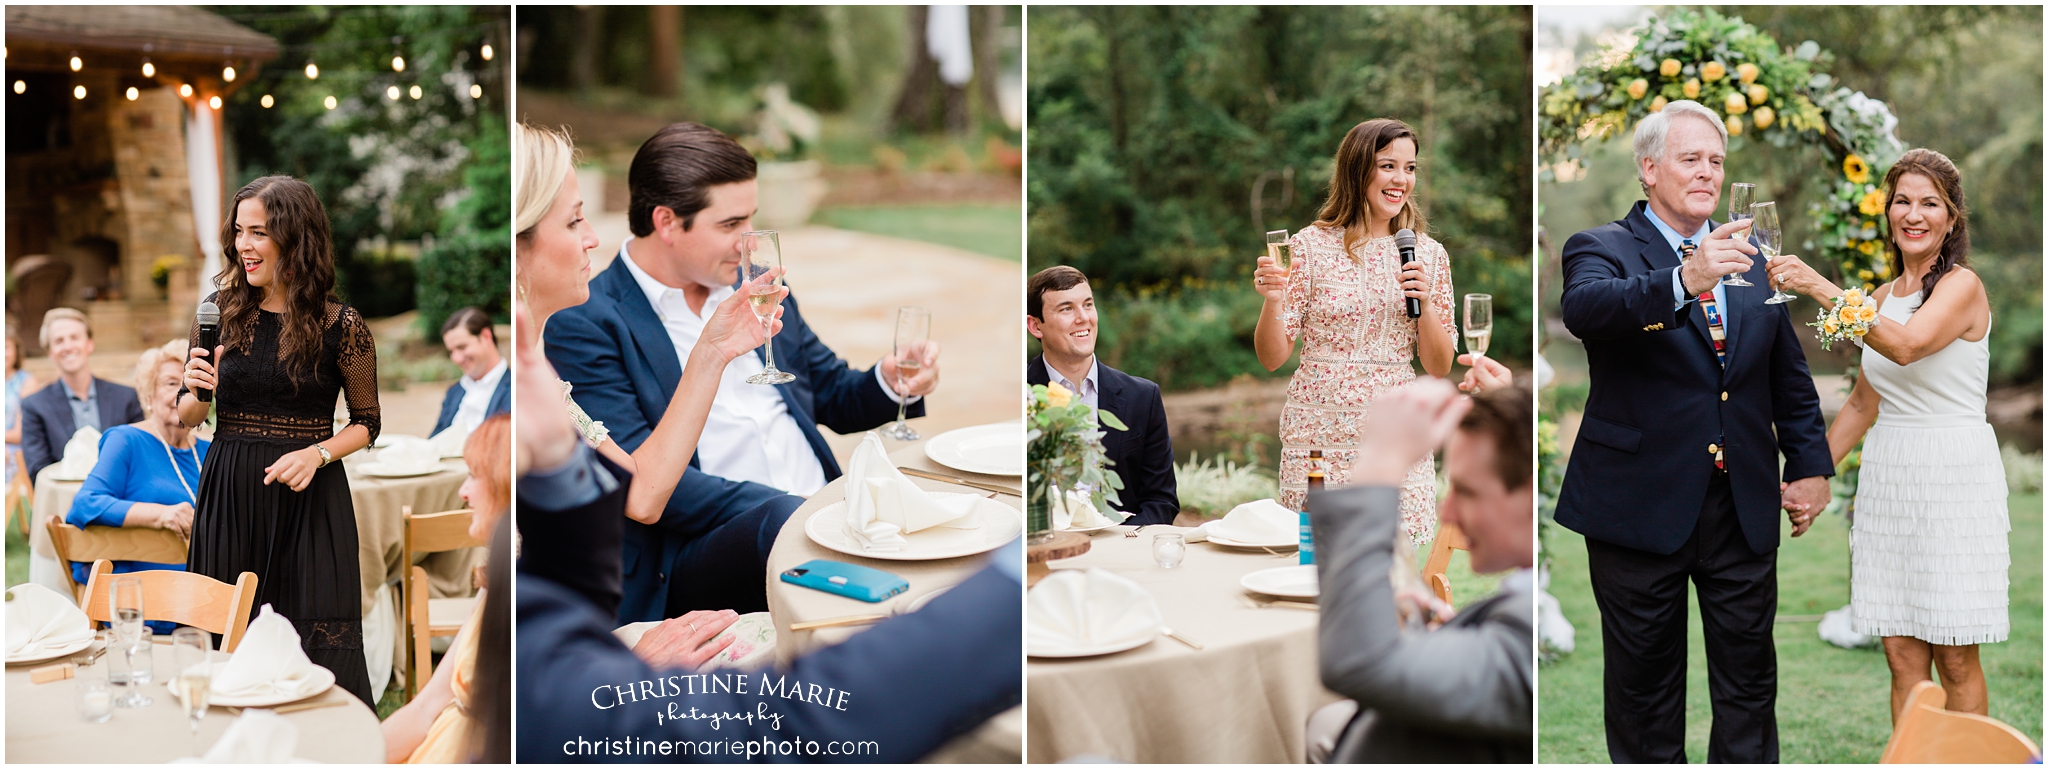 guests giving toasts, atlanta event photographer 